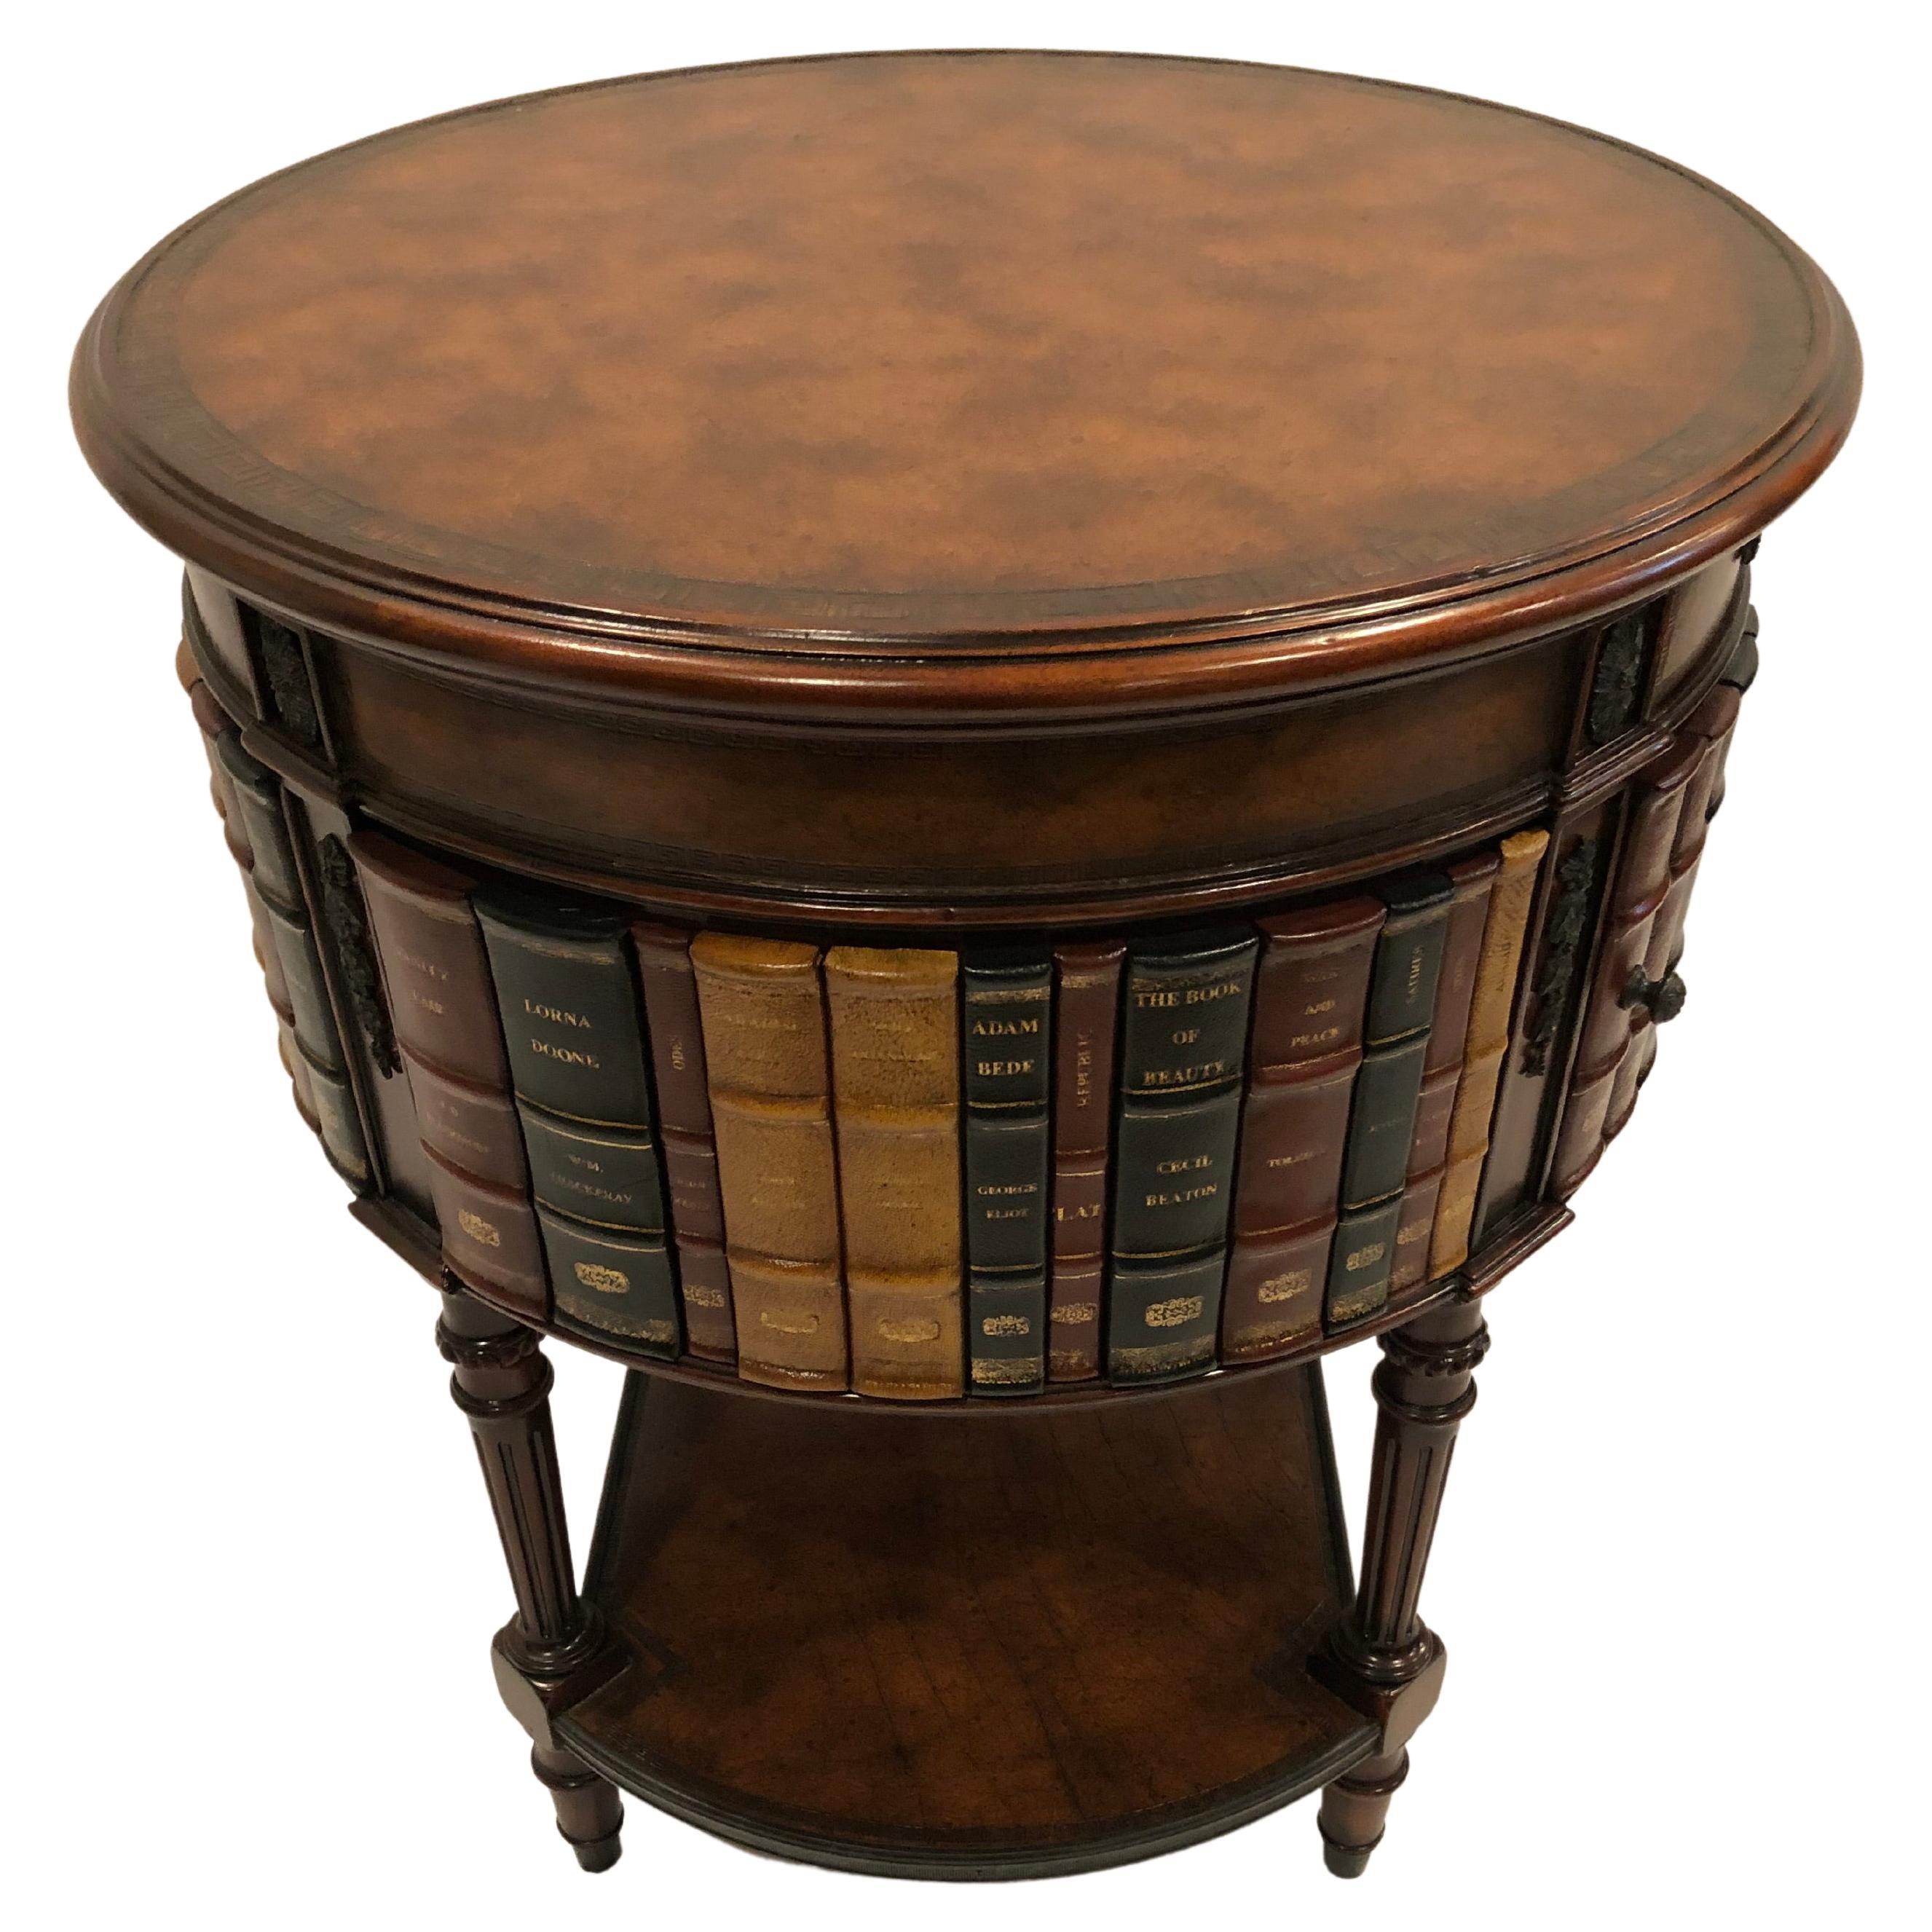 Stunning trompe l'oeil leather book motif round side table having embossed leather top and sides that look like a collection of leather classic books. There is one drawer and a door that opens to reveal storage within.